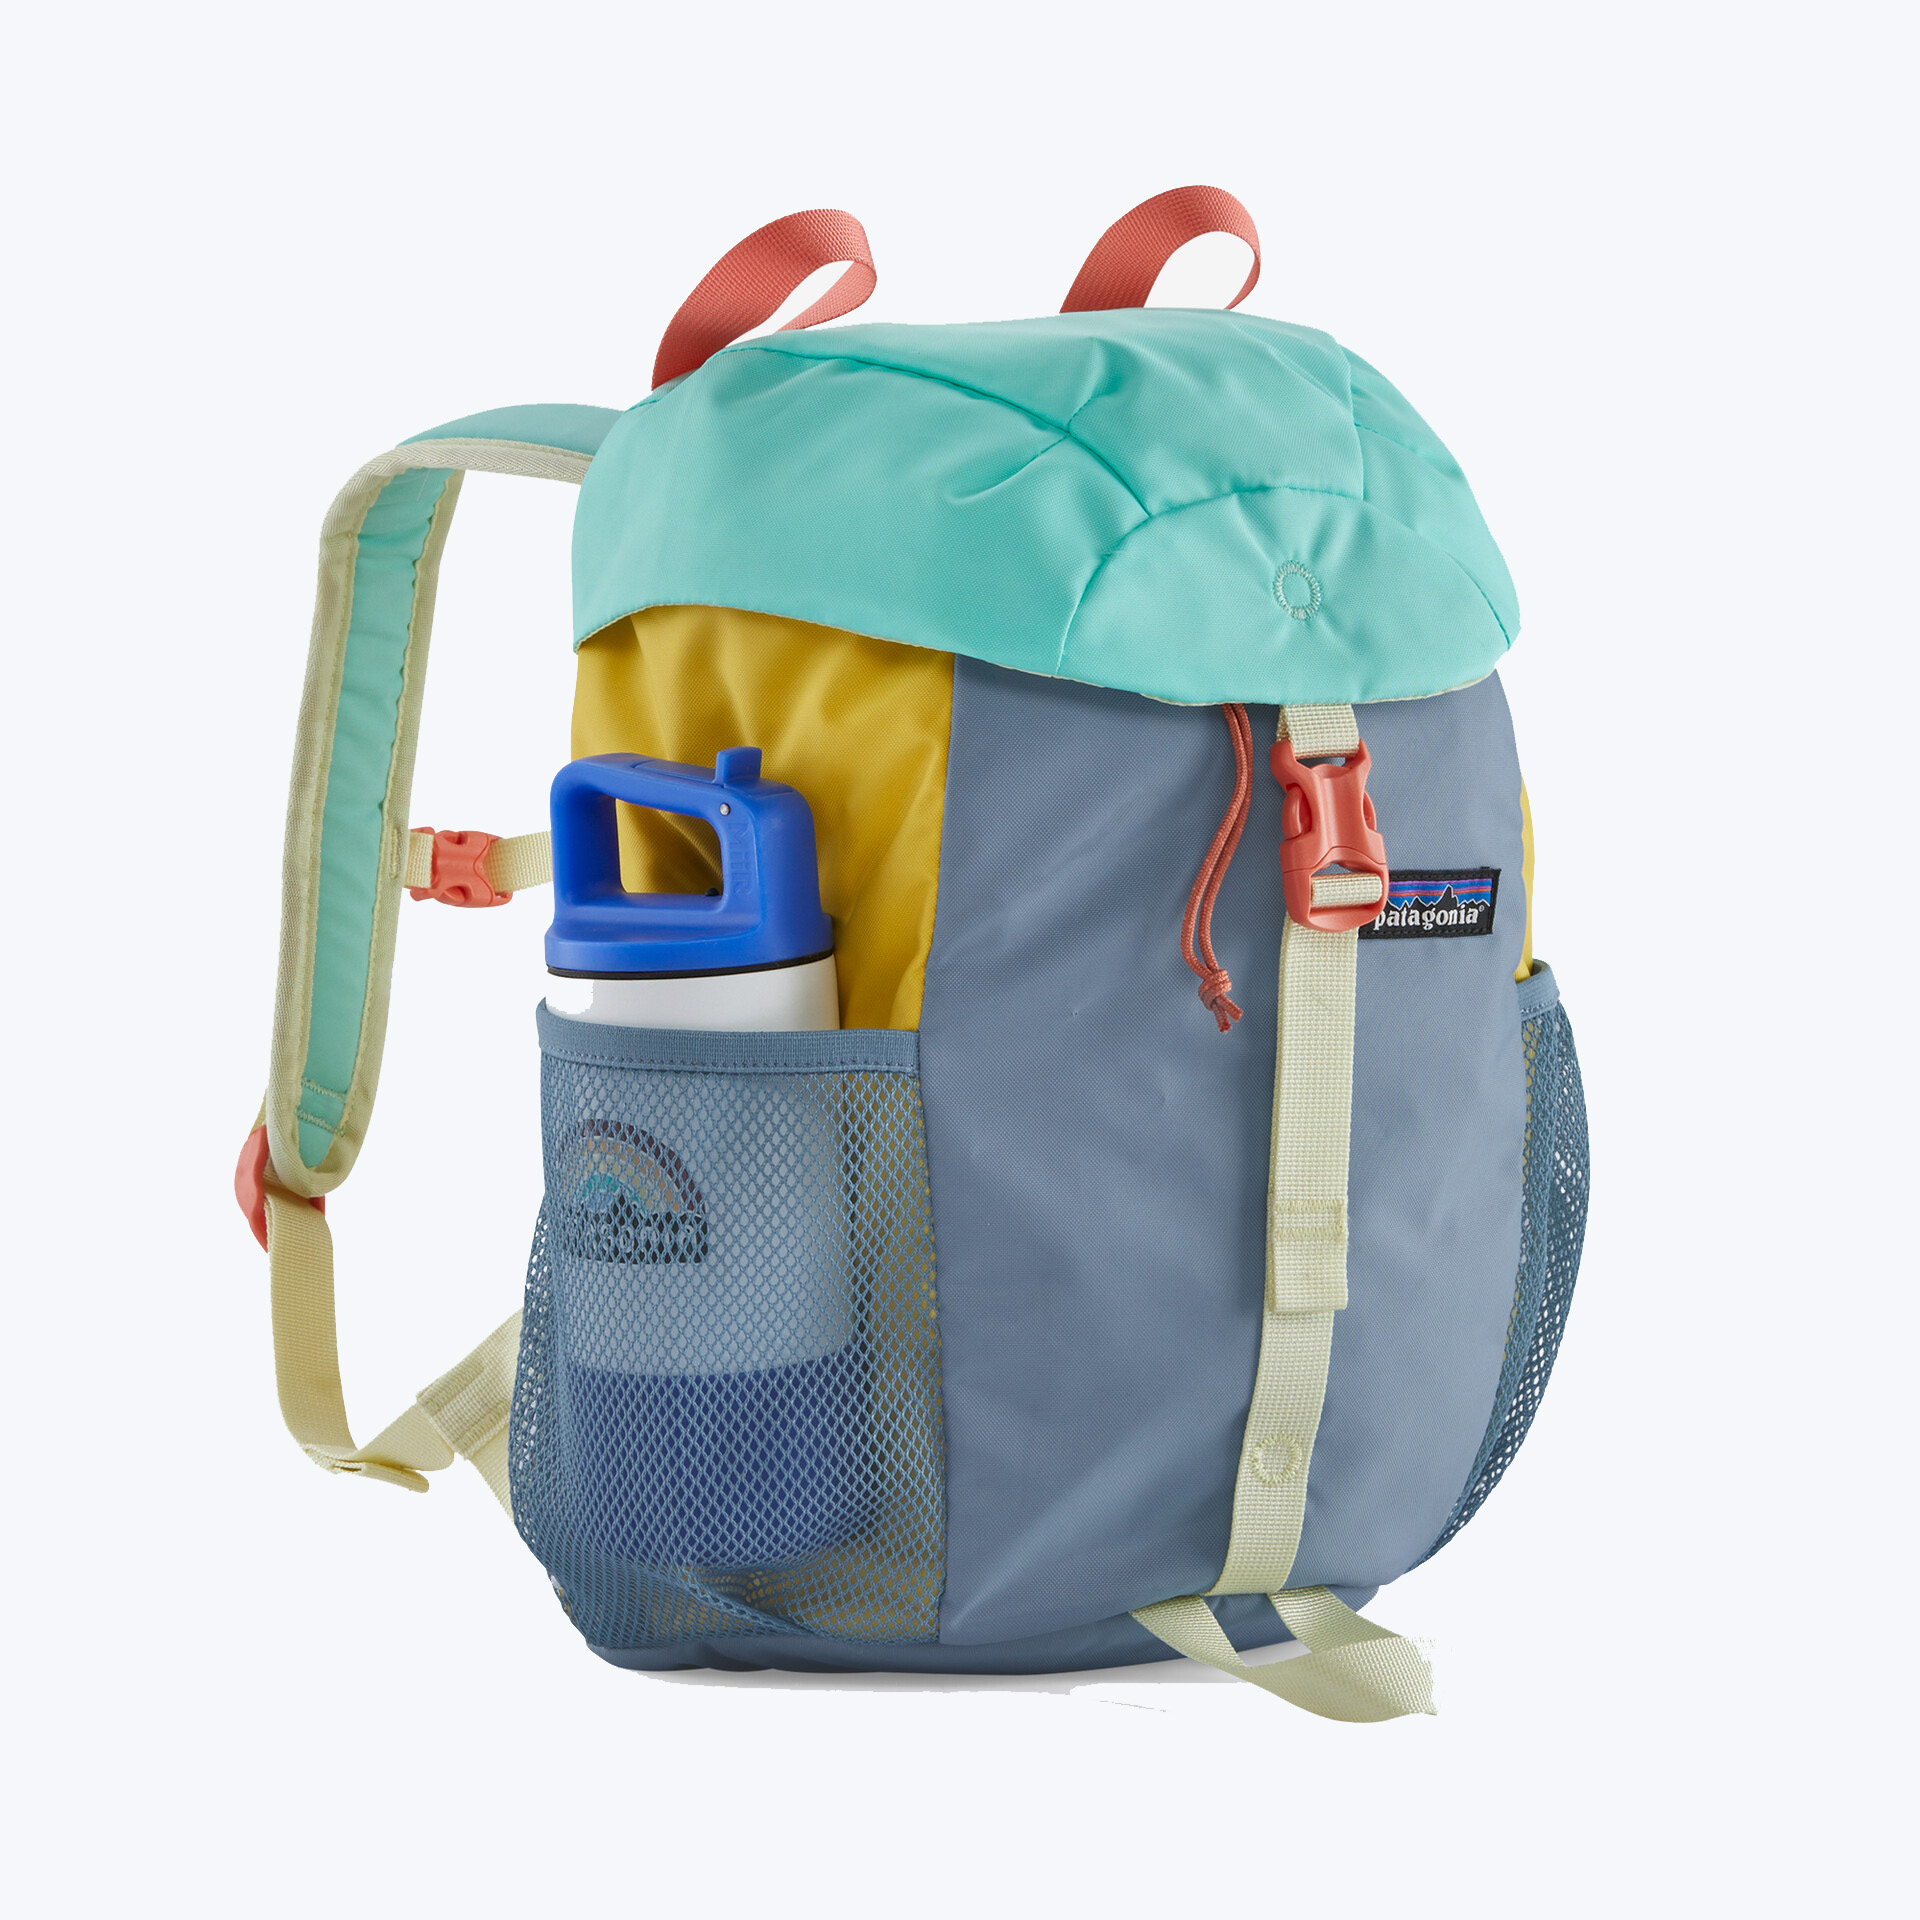 A colorful Patagonia kids backpack with a waterbottle in the side pocket.